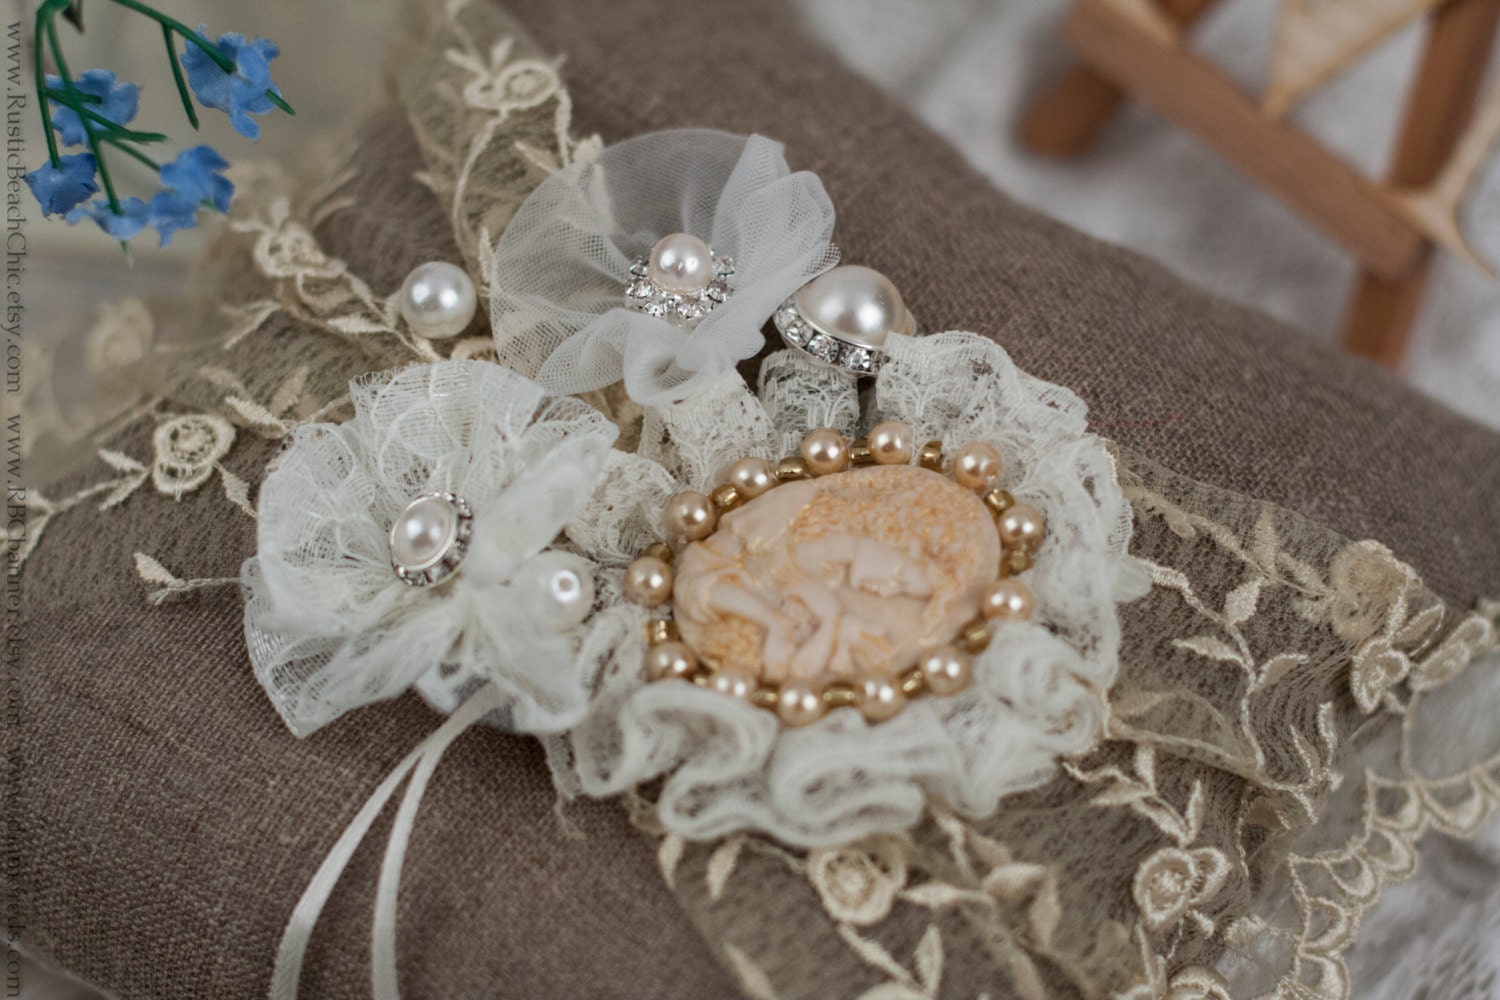 flowers and cameo vintage pillow, burlap and lace, Wedding ring bearer pillow